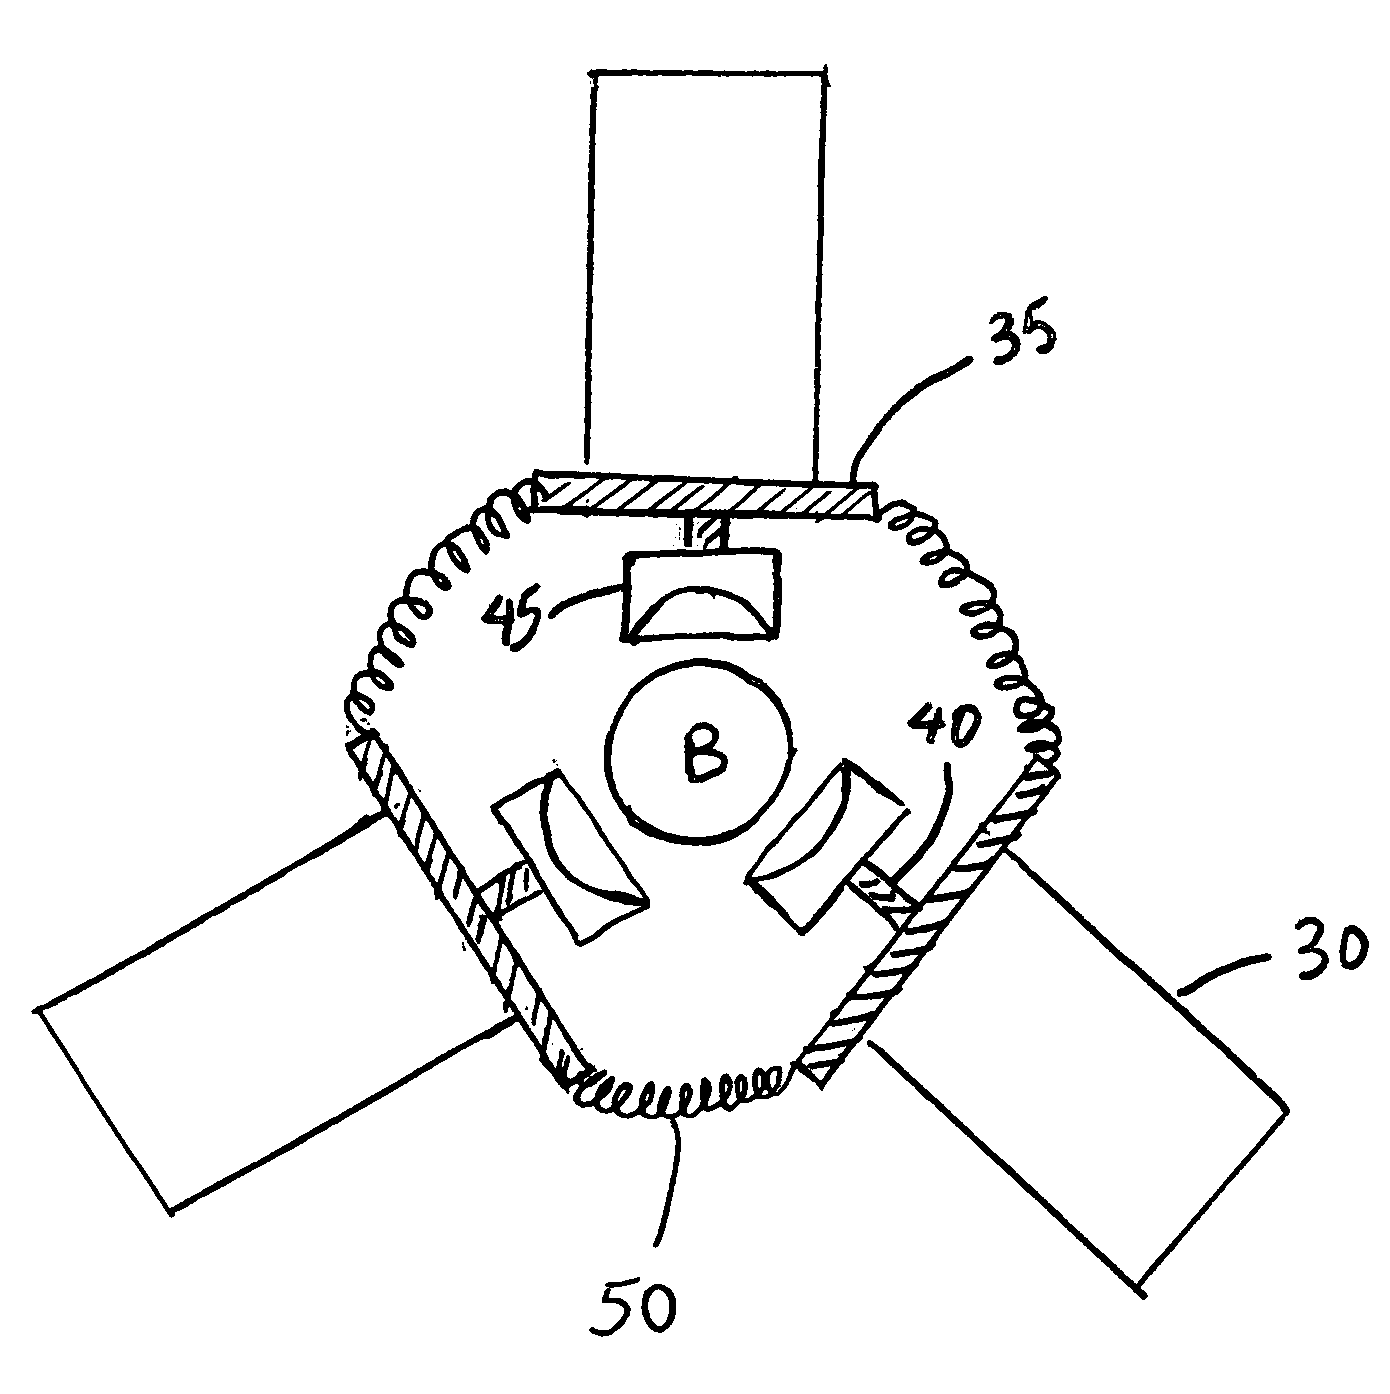 Apparatus for and method of refurbishing a lacrosse ball